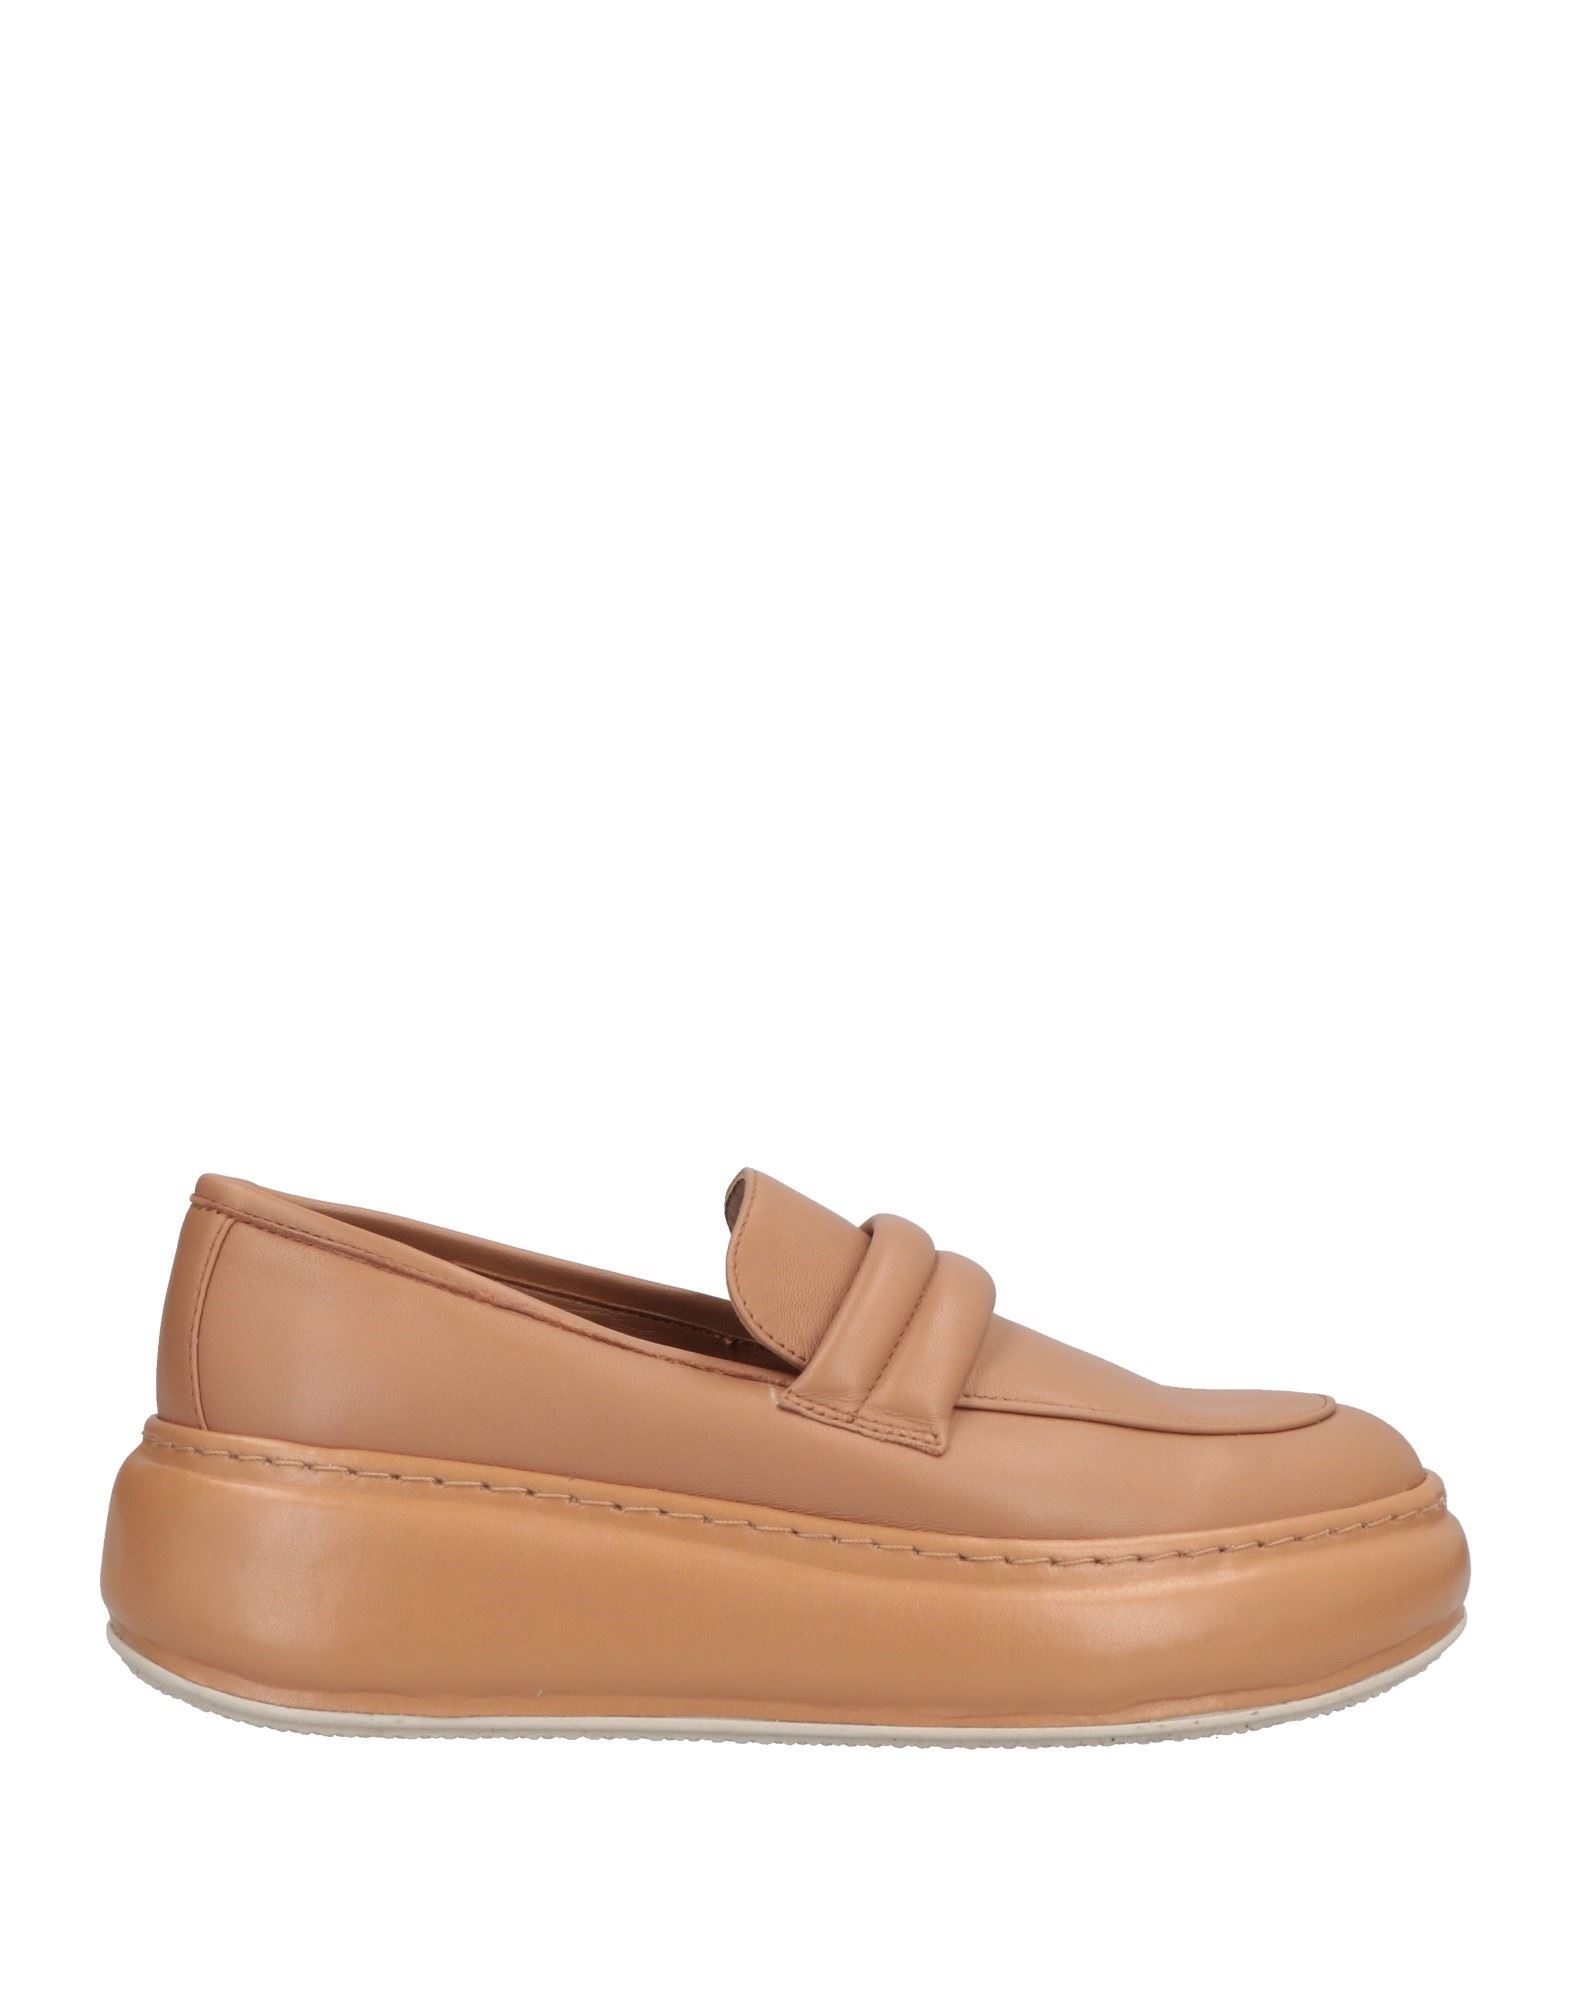 Paola Ferri Loafers In Brown